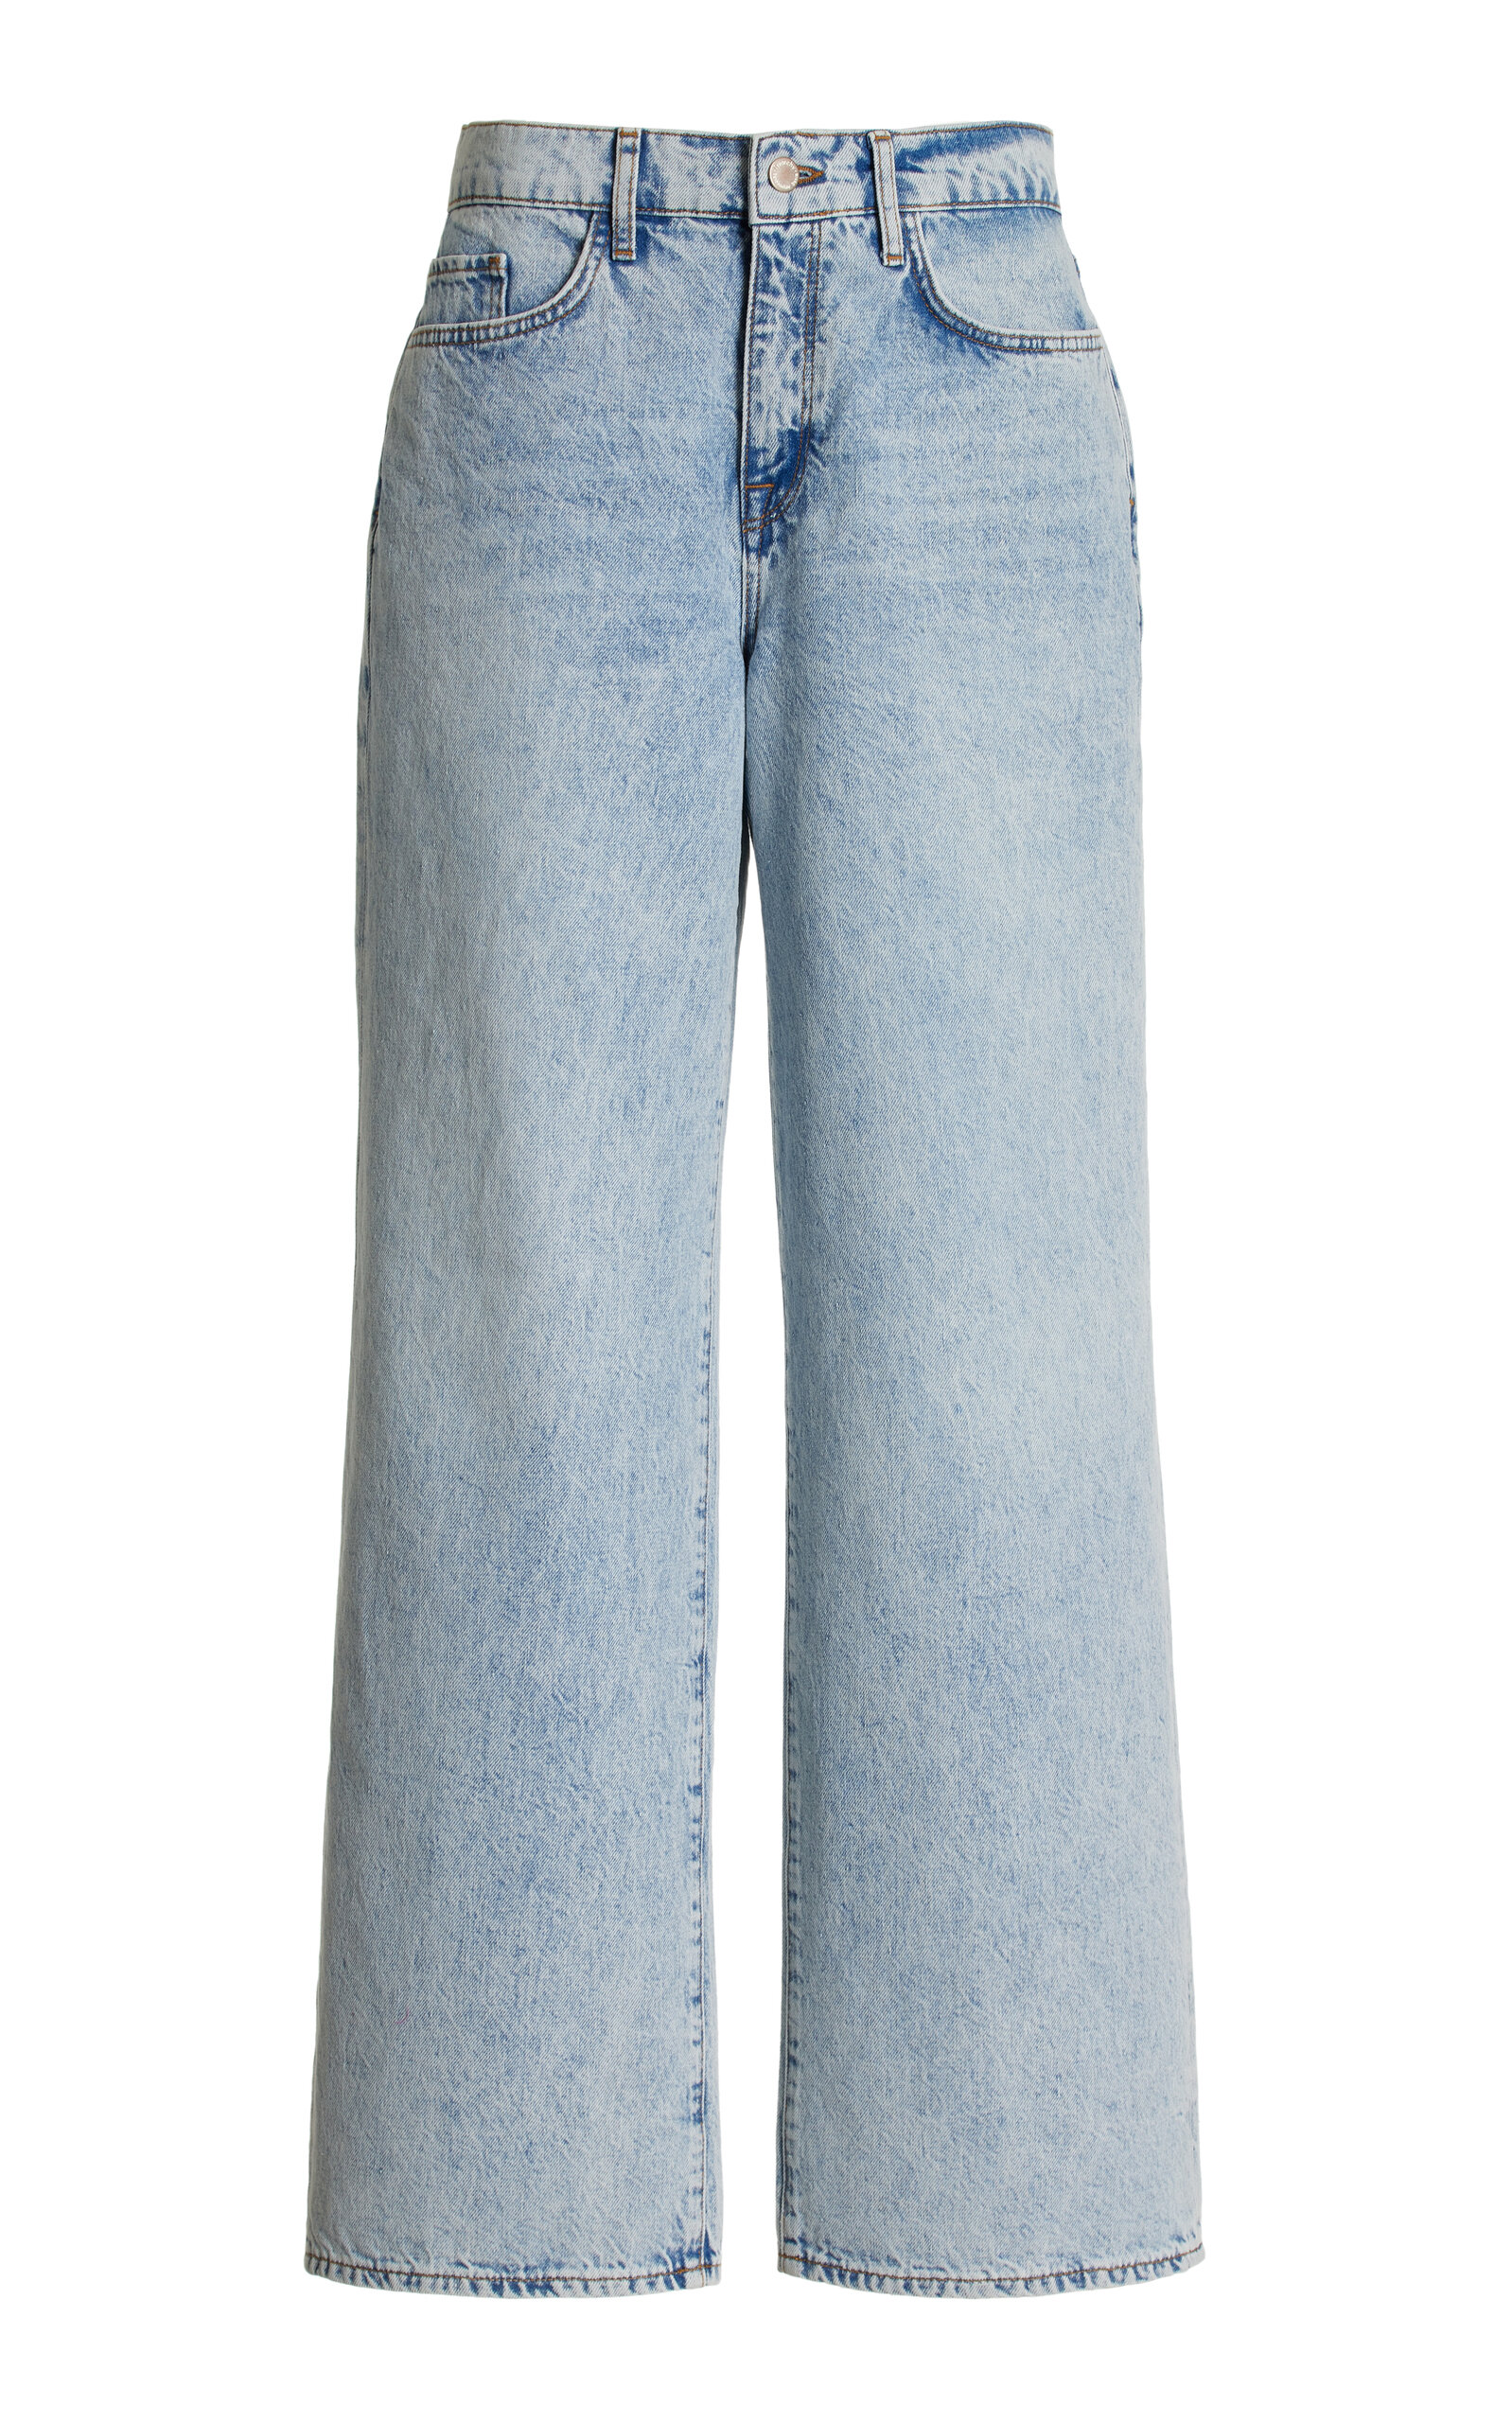 Triarchy Ms. Sparrow Rigid Mid-rise Baggy Jeans In Light Blue